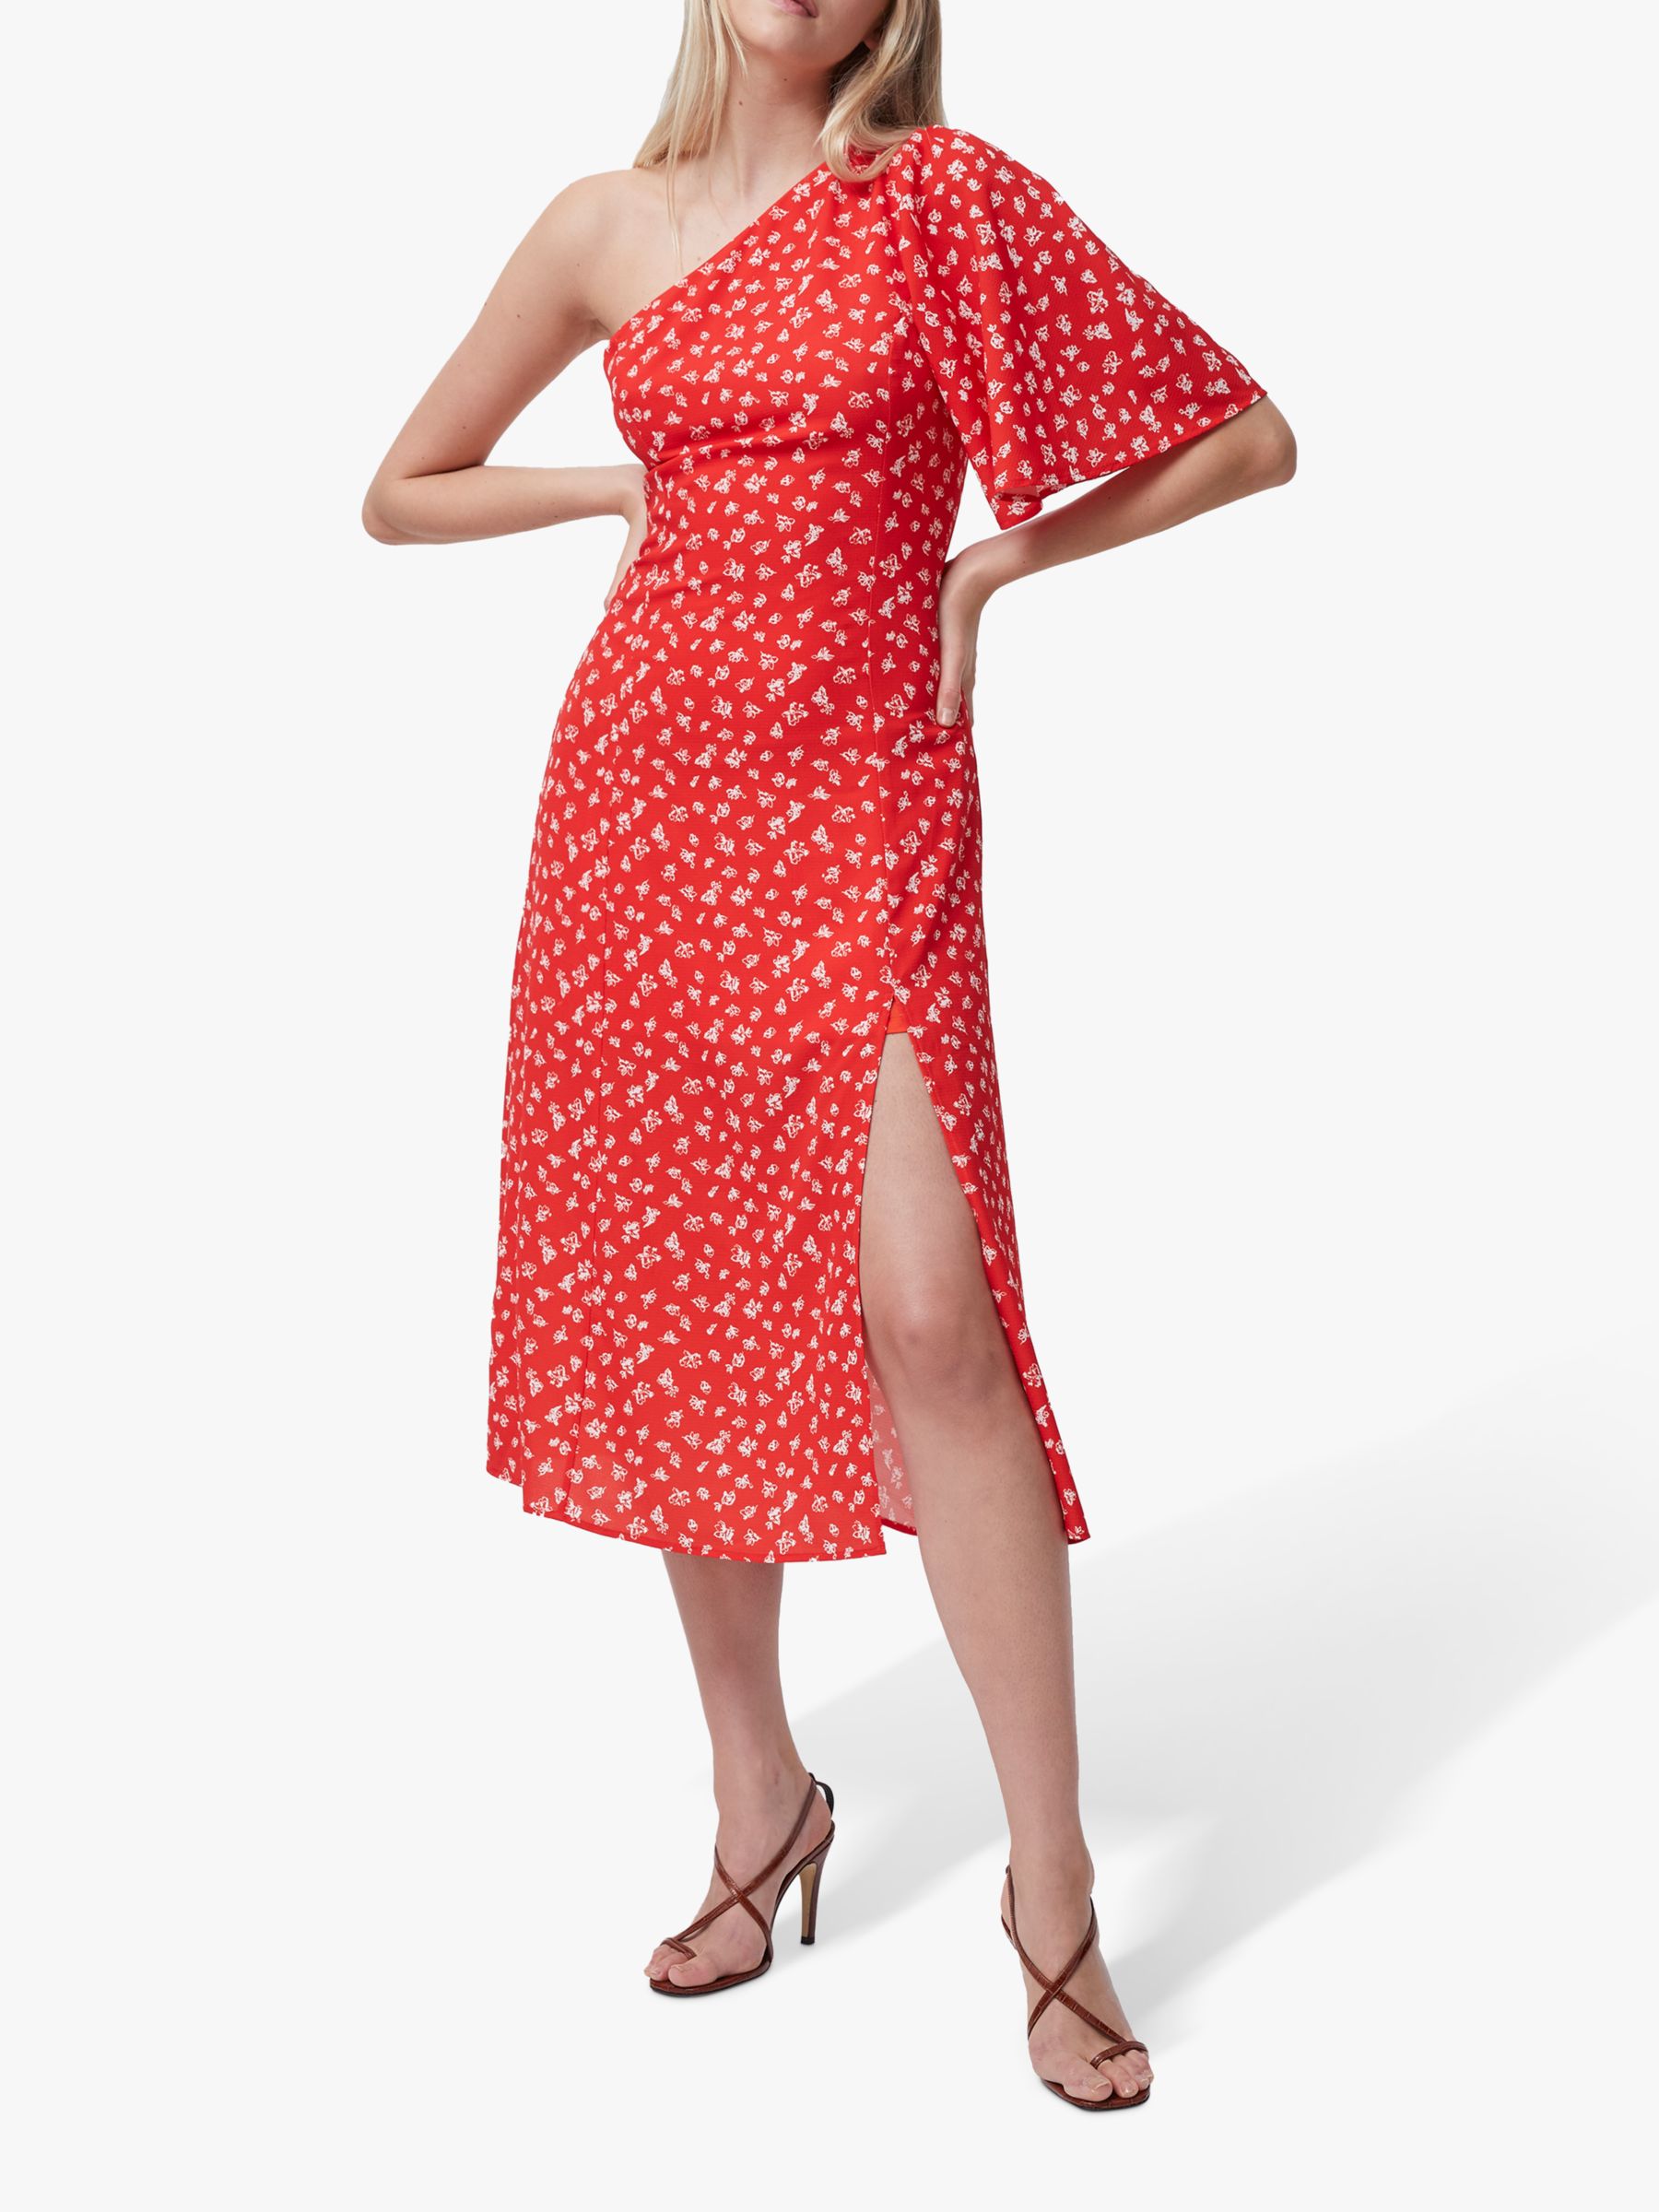 French Connection Fayola Floral Print Dress, Fiery Red/Multi